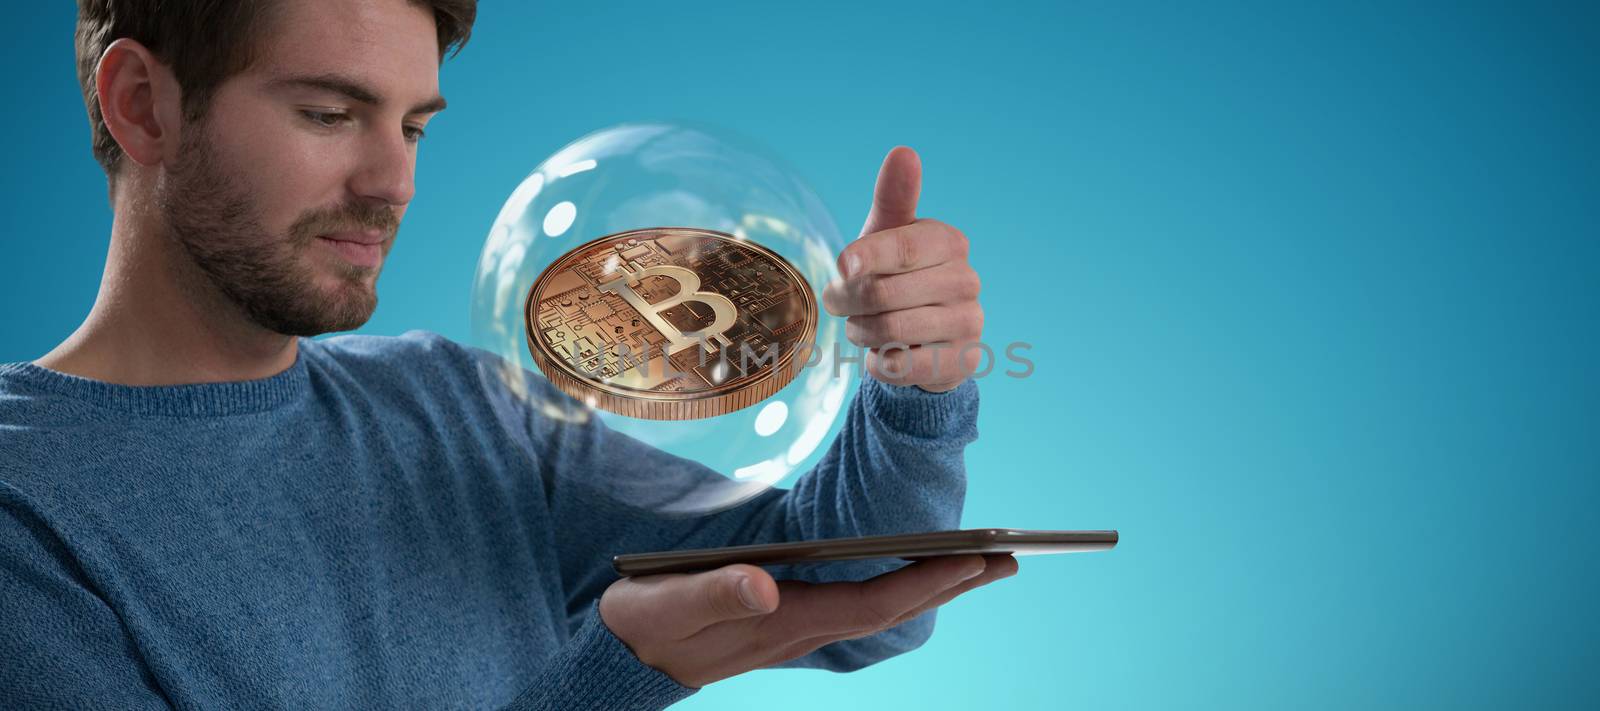 Man holding digital tablet against abstract blue background